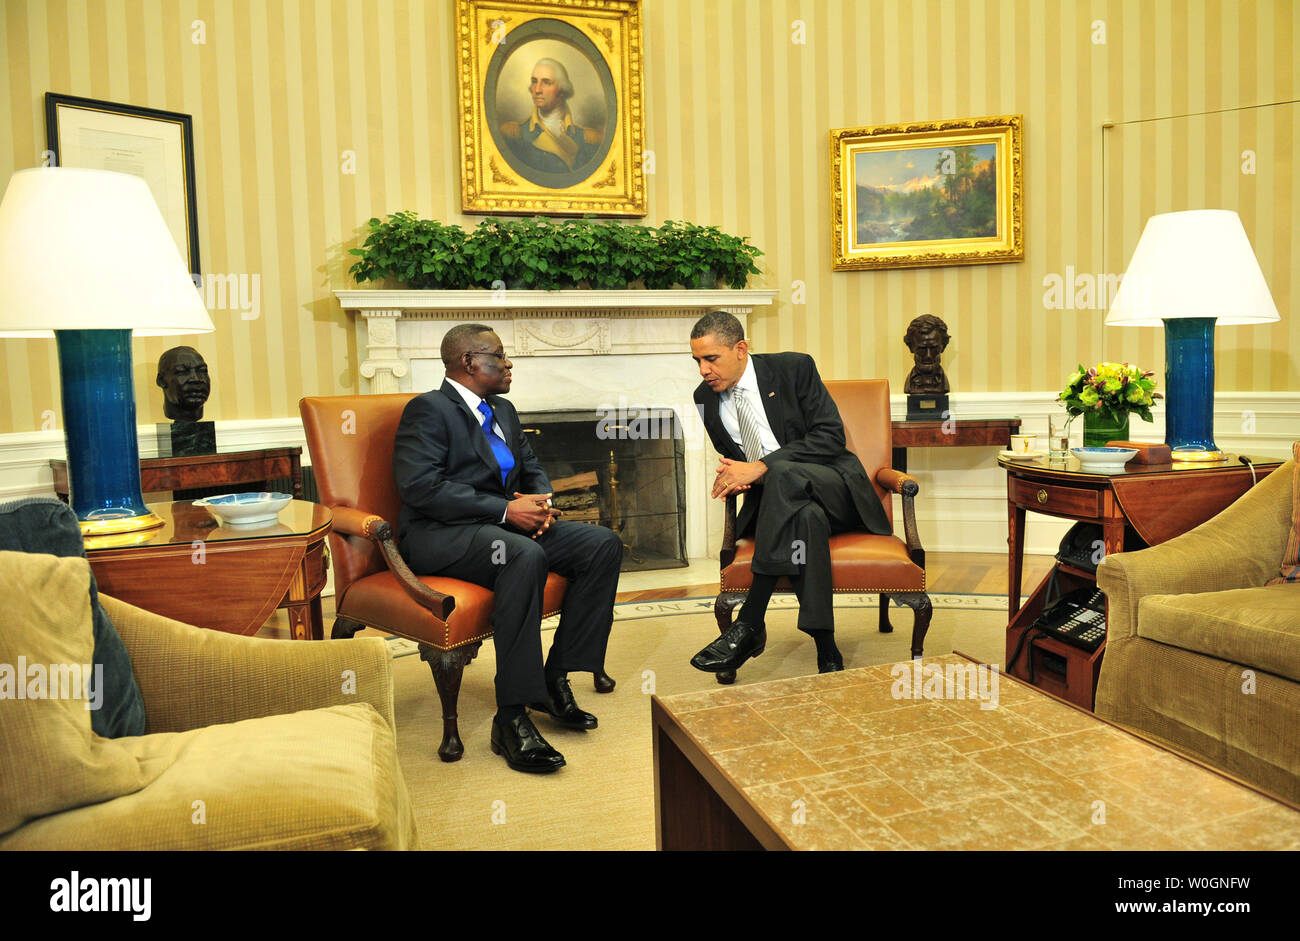 President Barack Obama meets with President John Evans Atta Mills of Ghana in the Oval Office of the White House in Washington, D.C. on March 8, 2012.  UPI/Kevin Dietsch Stock Photo